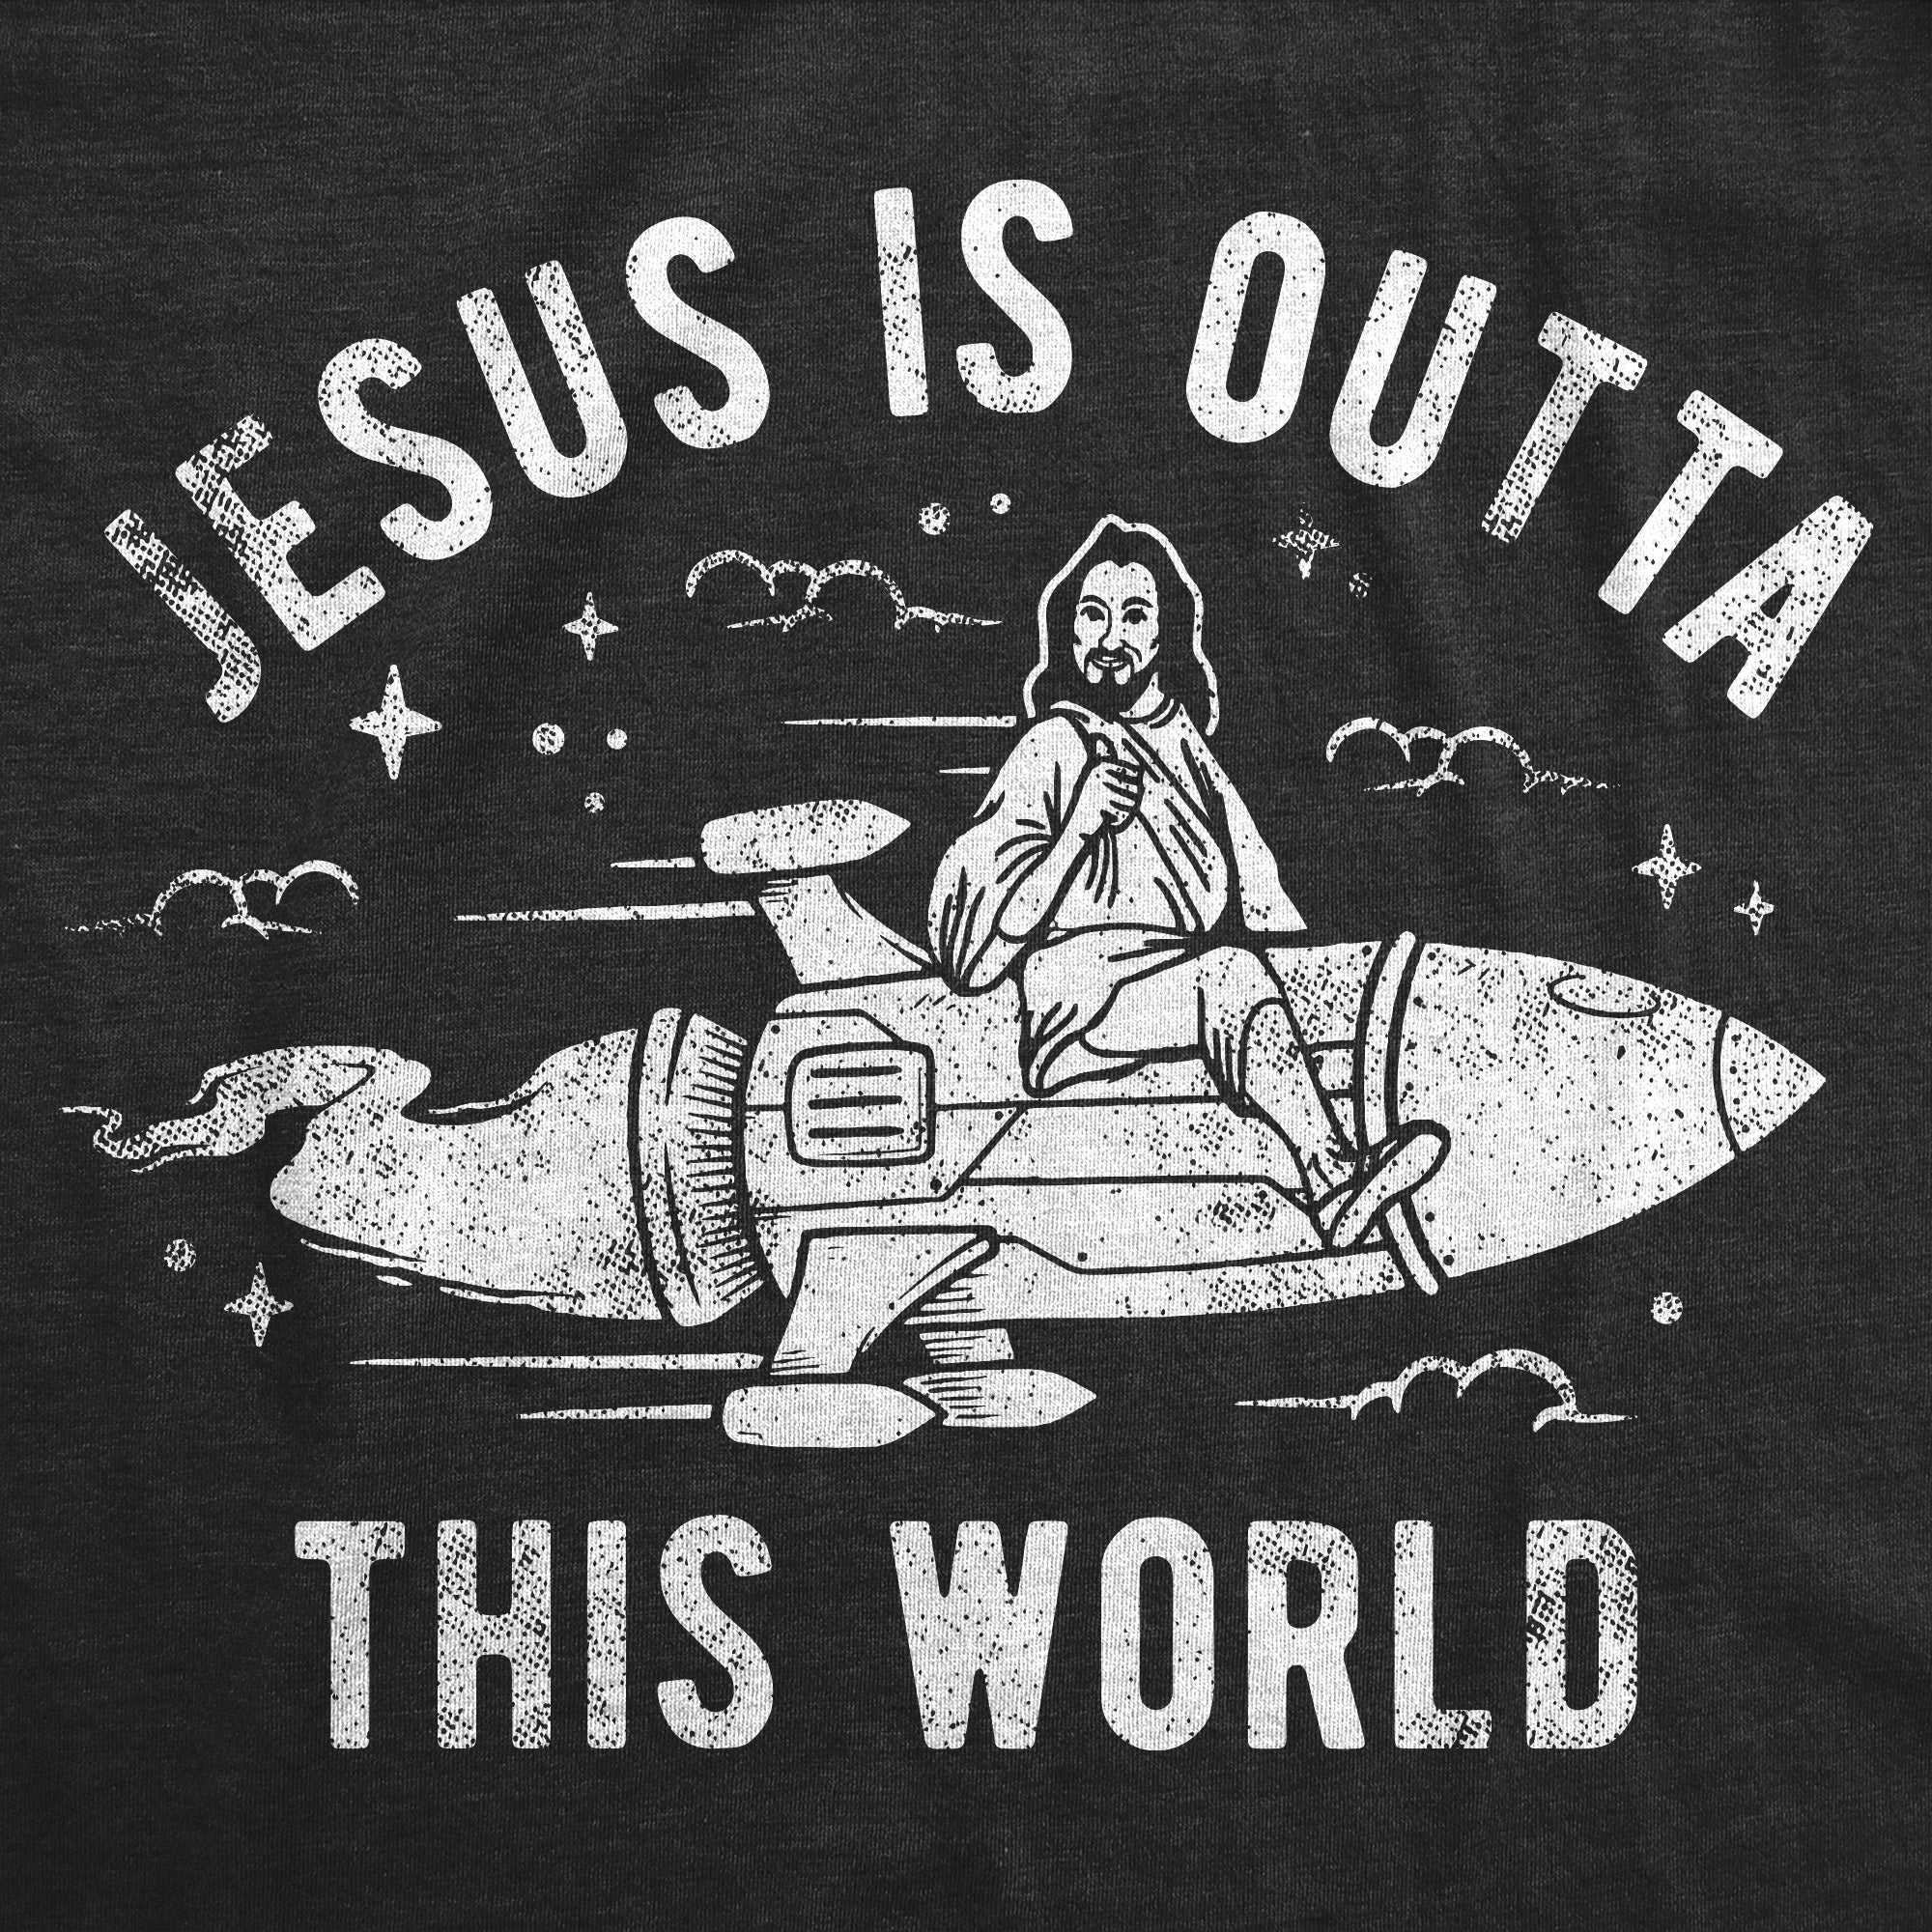 Funny Heather Black - Jesus Is Outta This World Jesus Is Outta This World Womens T Shirt Nerdy Easter Religion sarcastic space Tee